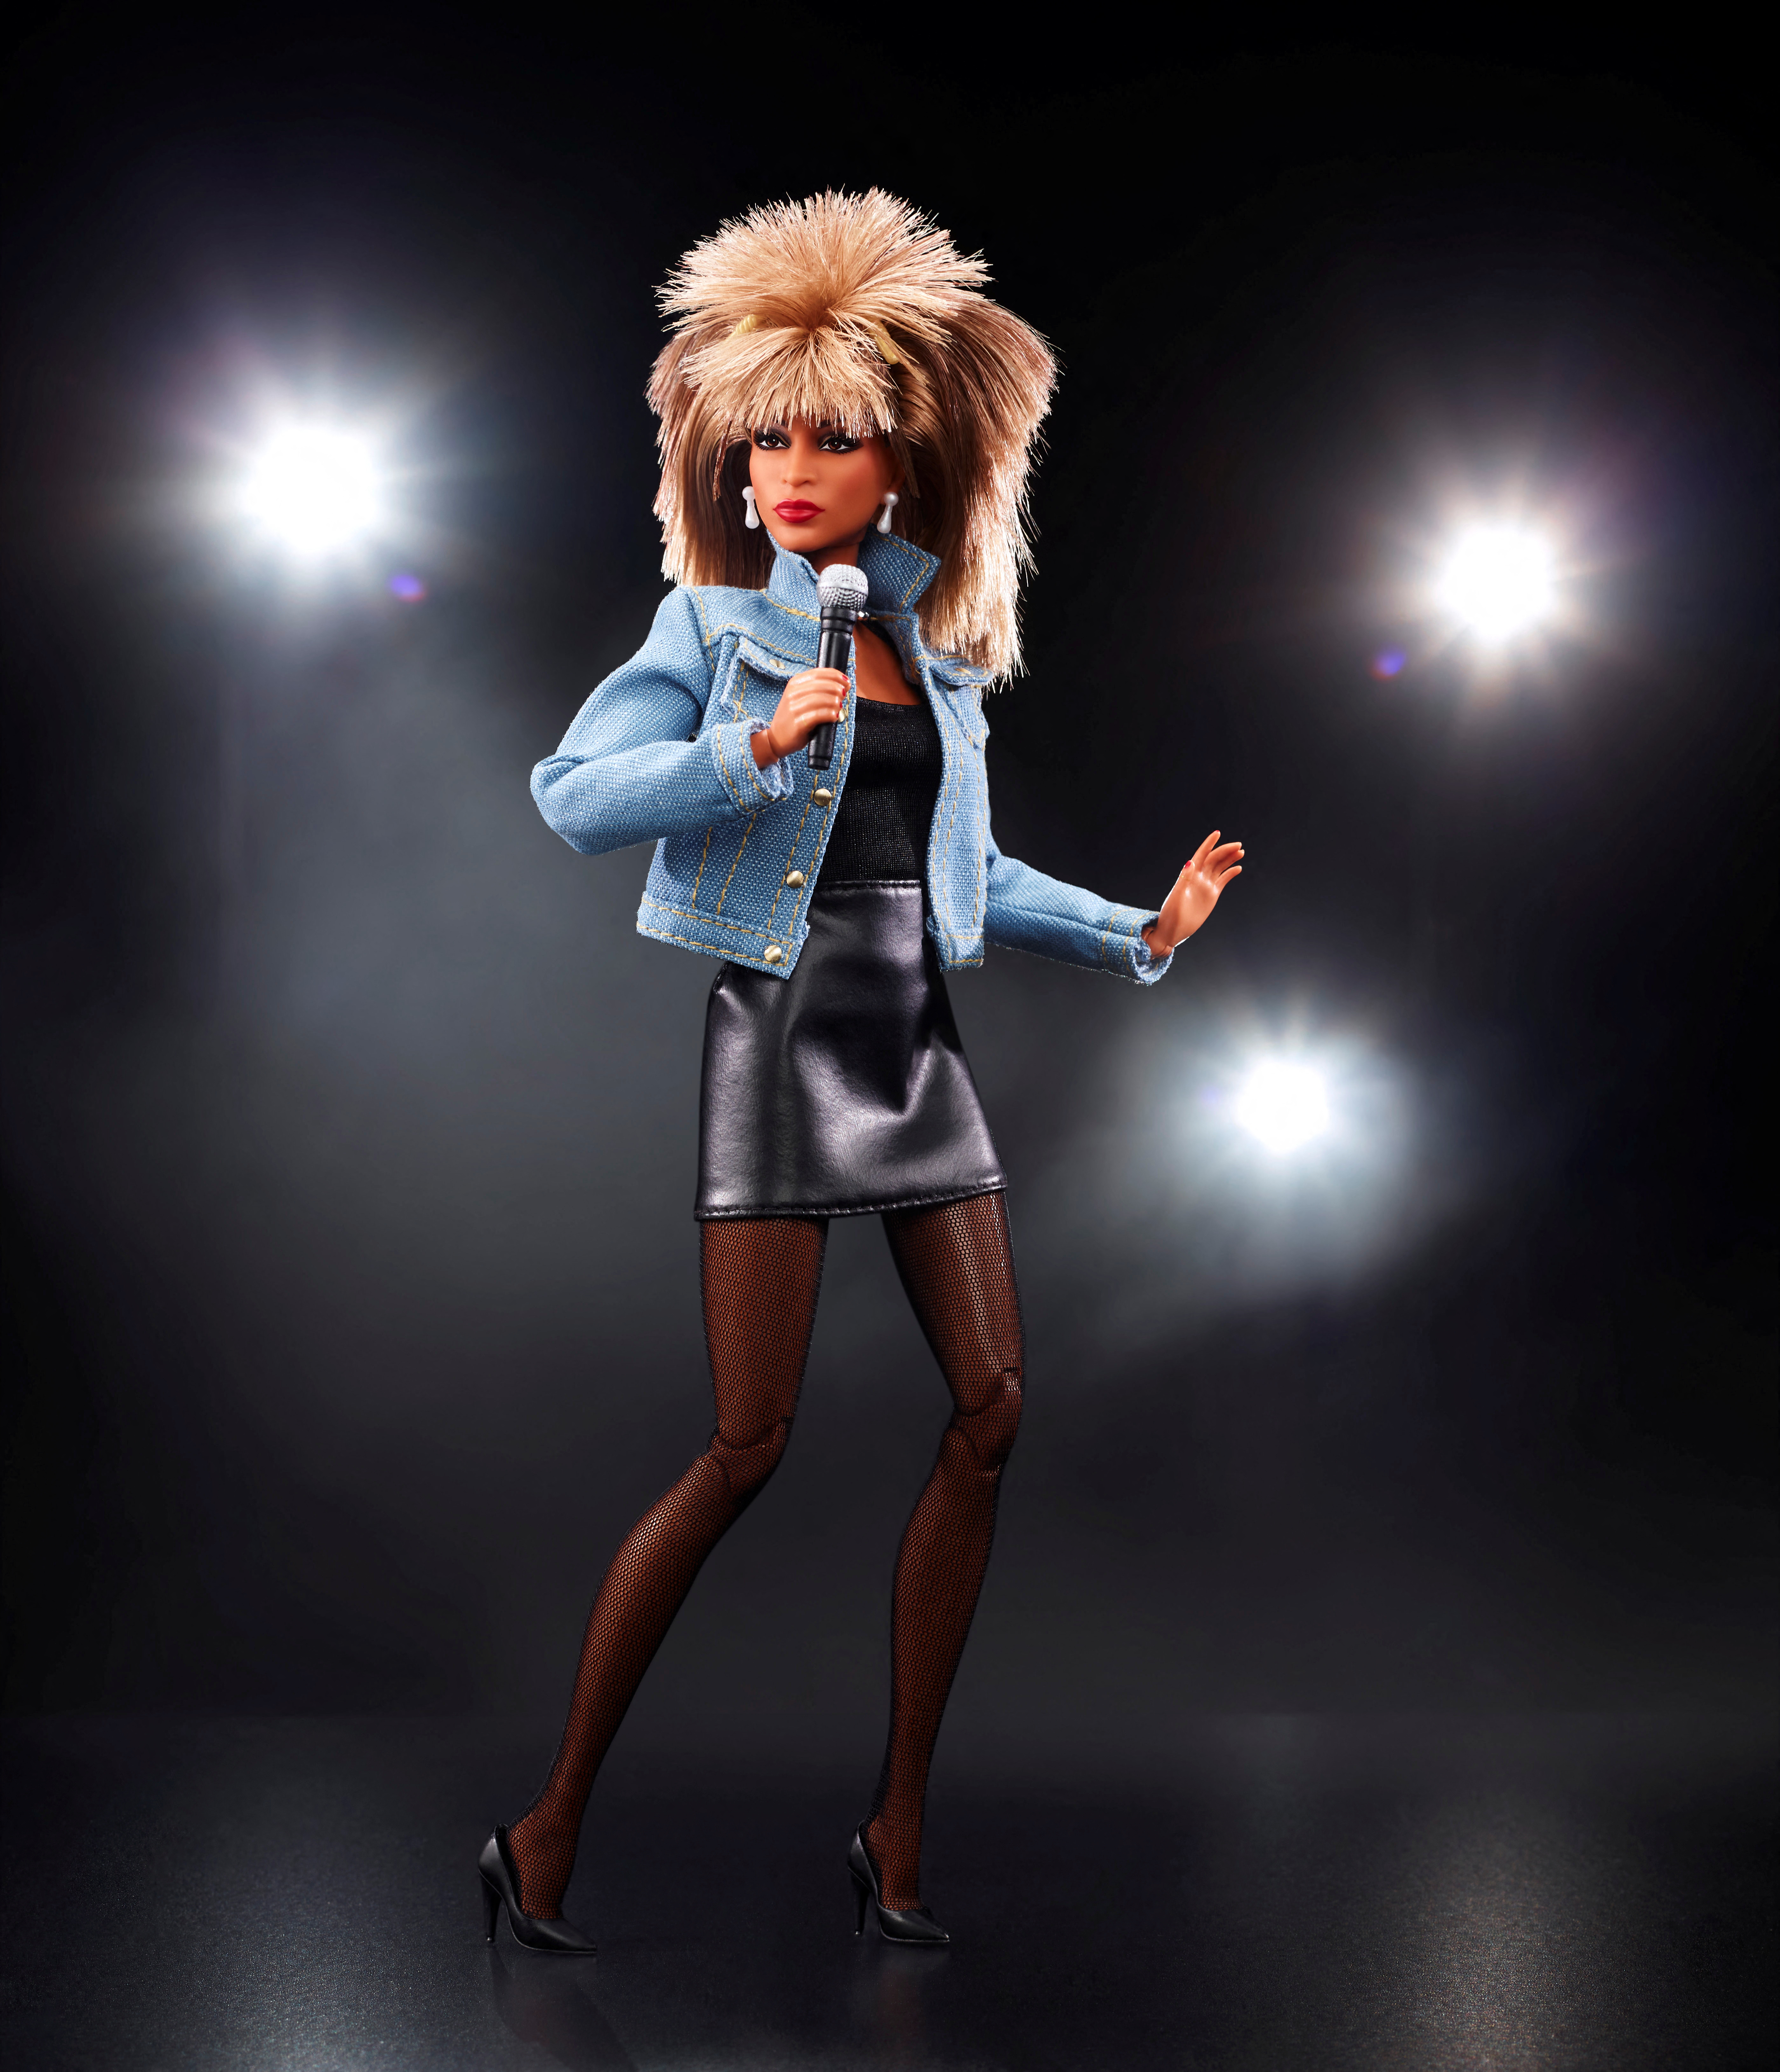 Toy company Mattel is celebrating the 40th anniversary of Tina Turner’s hit song with a Barbie created in her likeness.